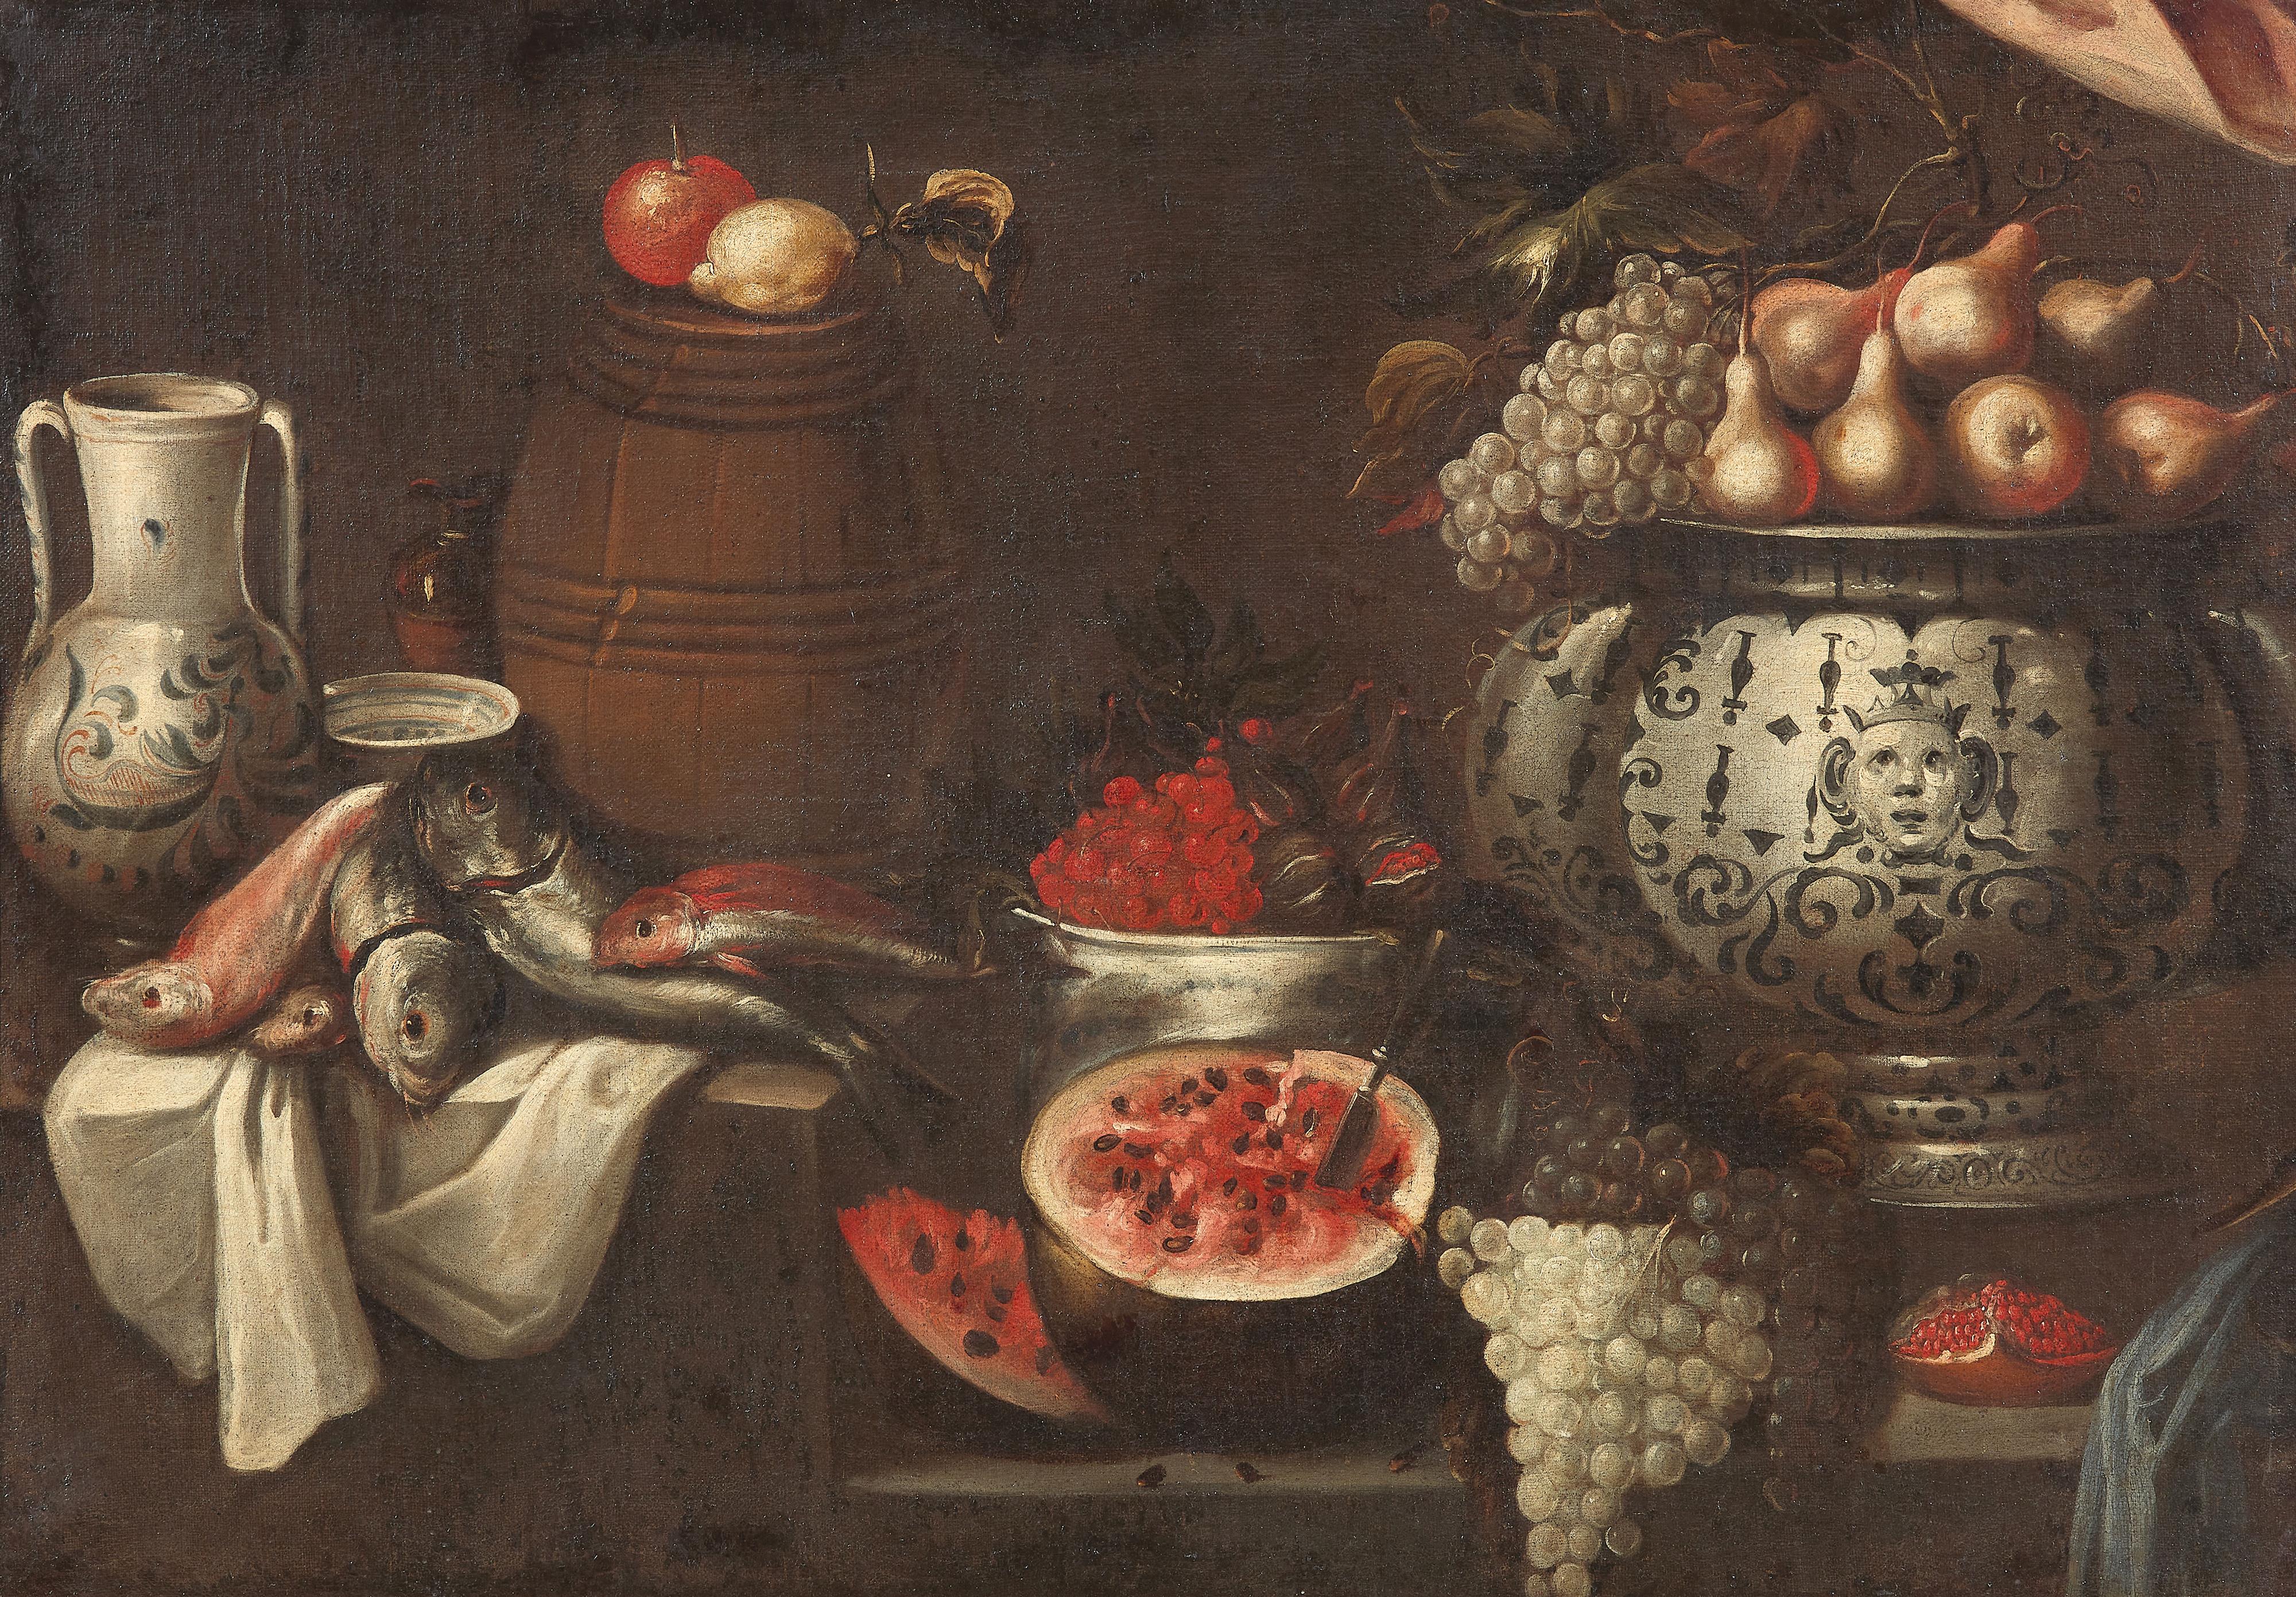 Spanish School 17th Century - Still life with Fruit, Ceramic Vessels and a Small Wooden Barrel - image-1